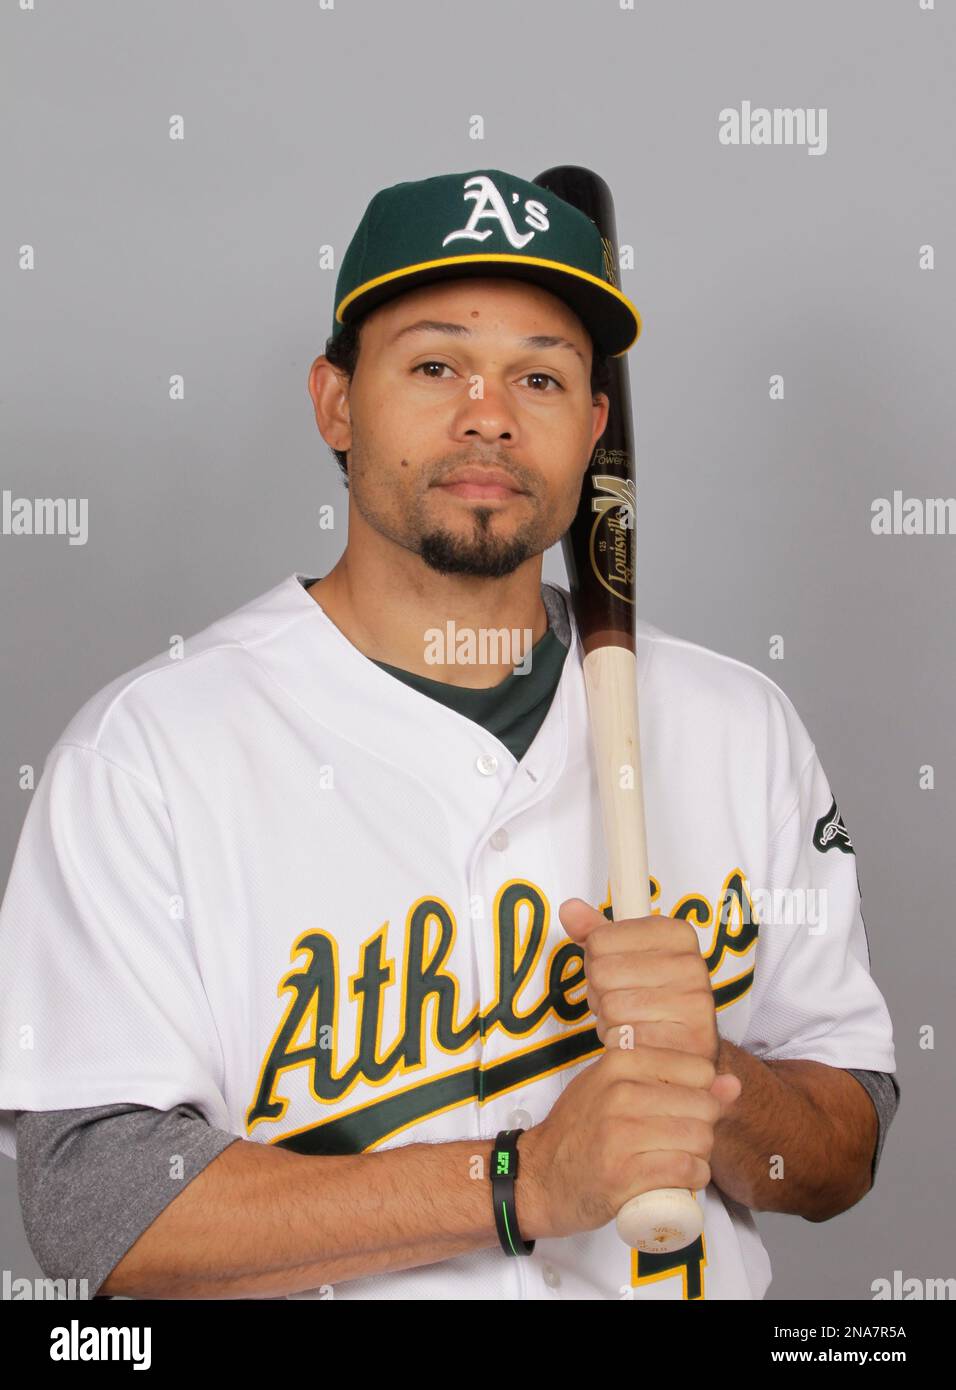 In this July 23, 2014 file photo, Oakland Athletics' Yoenis